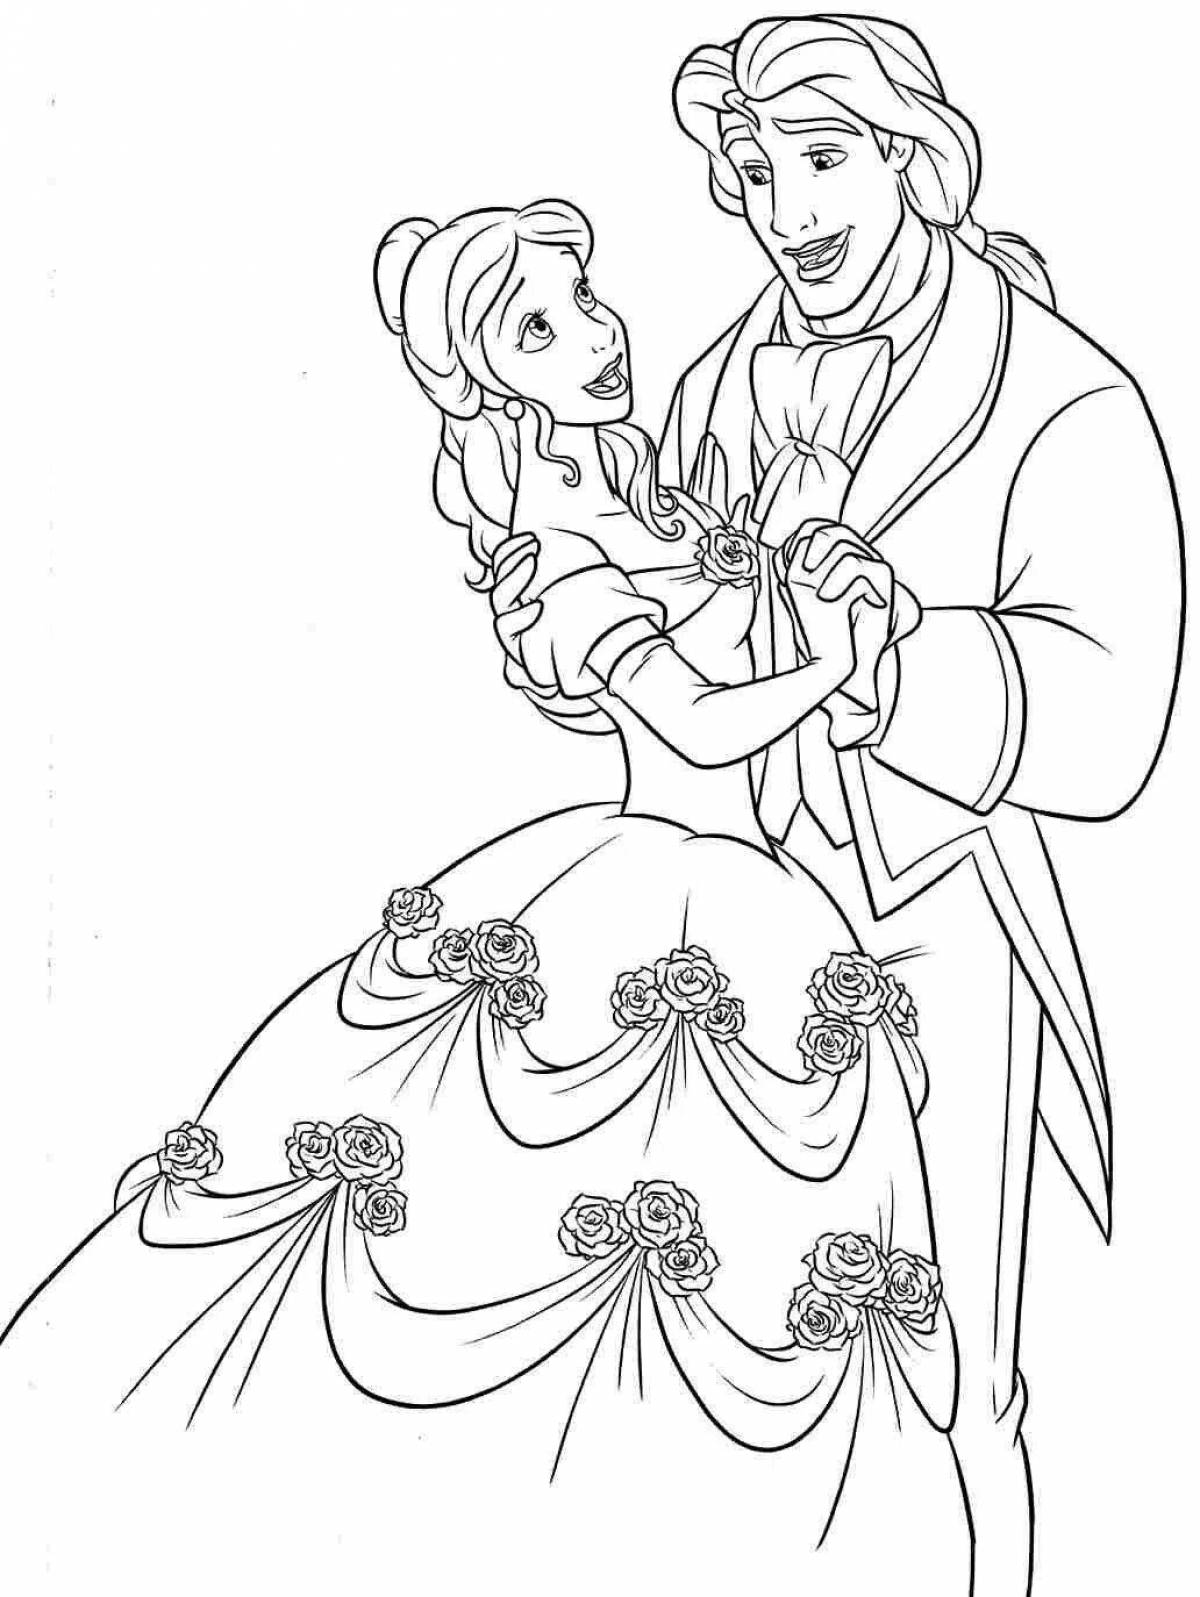 Coloring page magnanimous belle and the monster